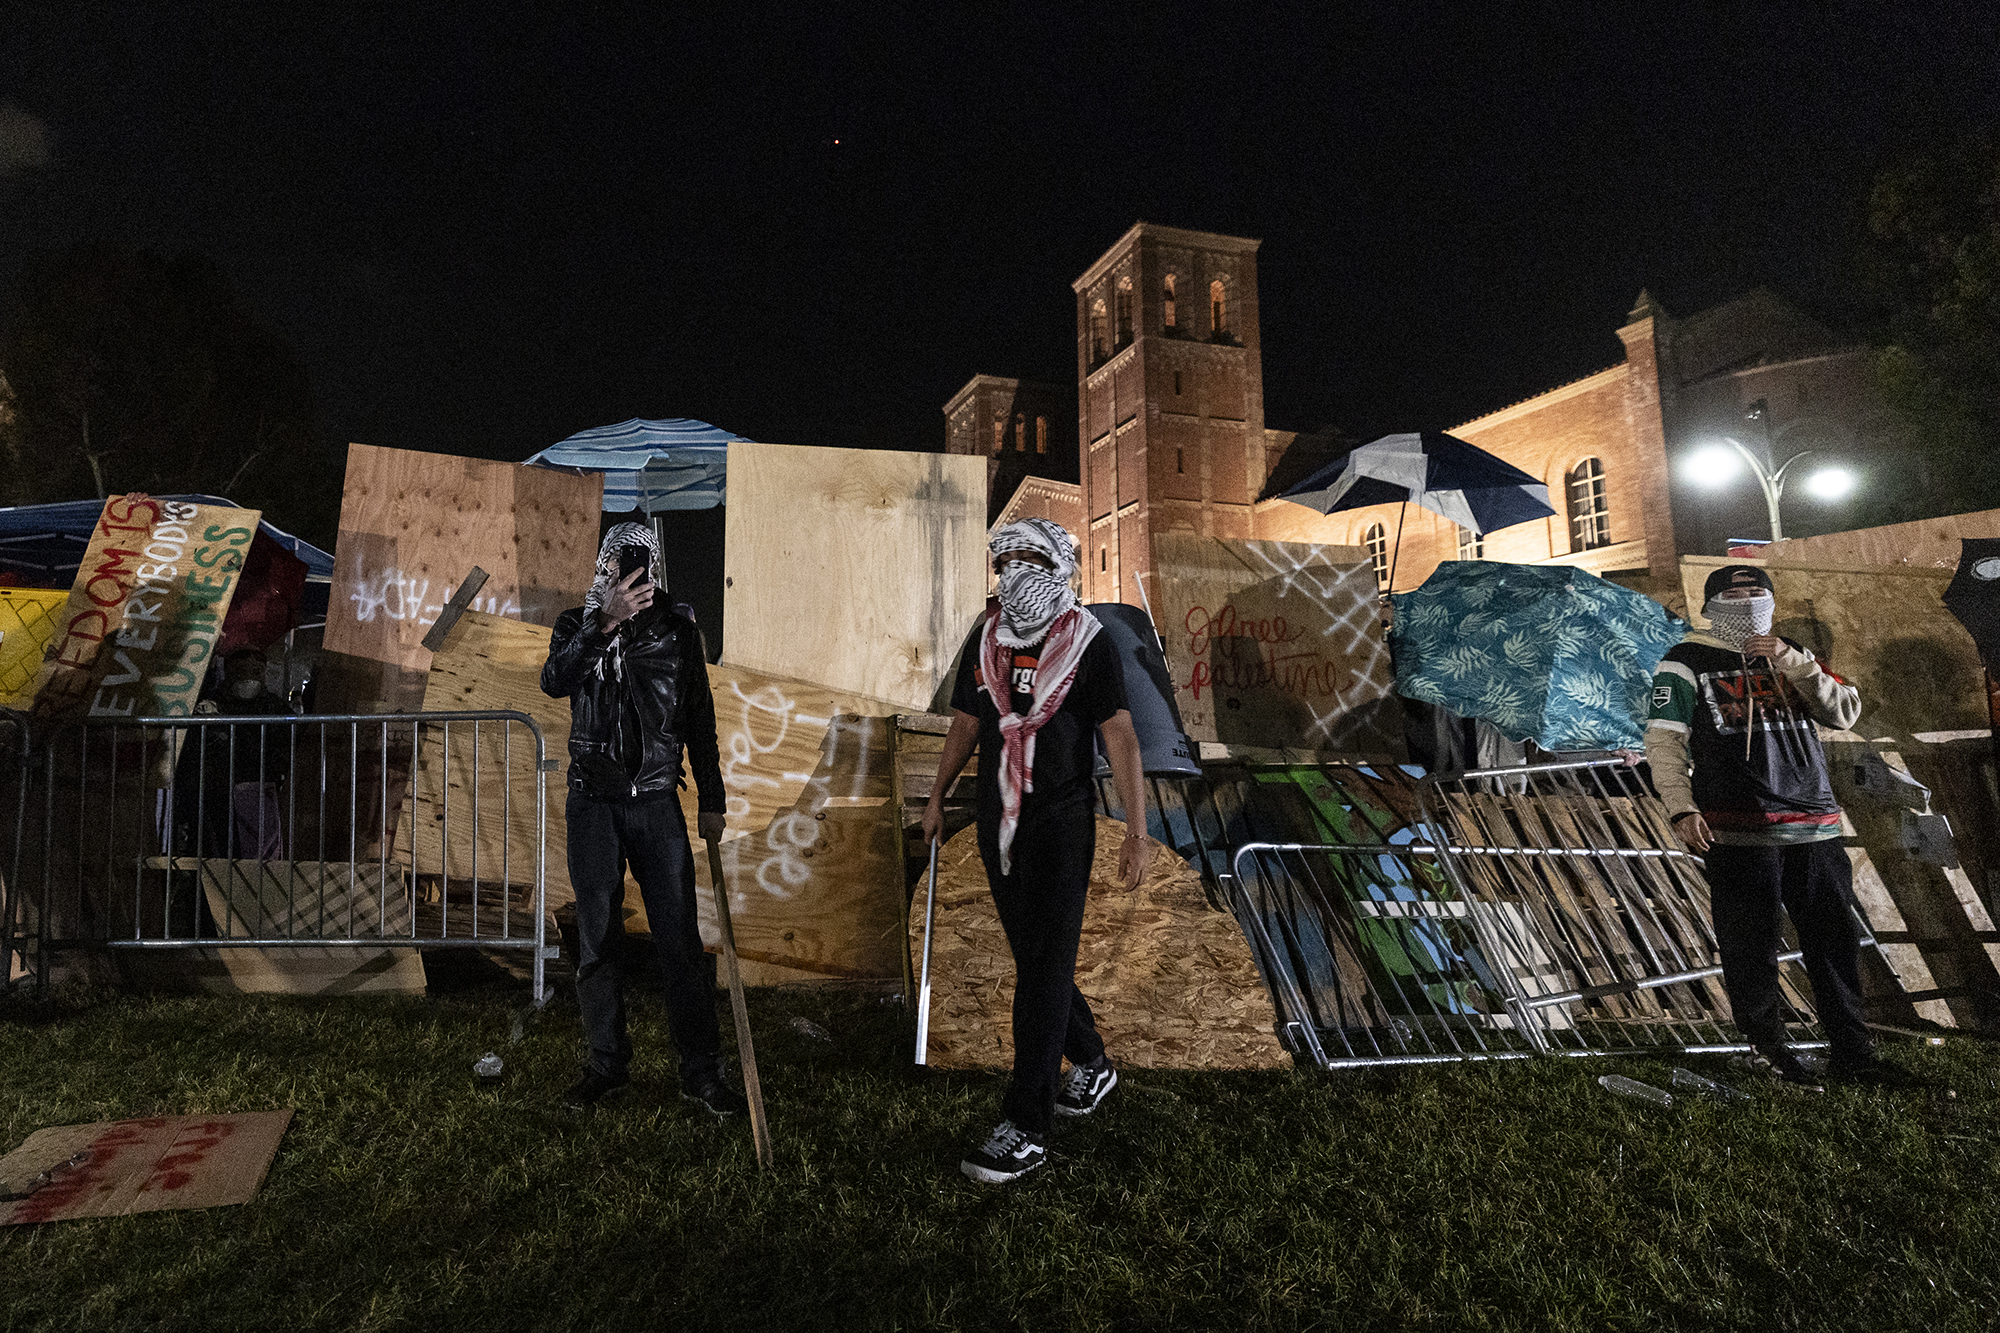 Pro-Palestinian demonstrators regroup and rebuild the barricade surrounding the encampment set up on the campus of the University of California Los Angeles (UCLA) as clashes erupt with counter protesters, in Los Angeles on May 1.